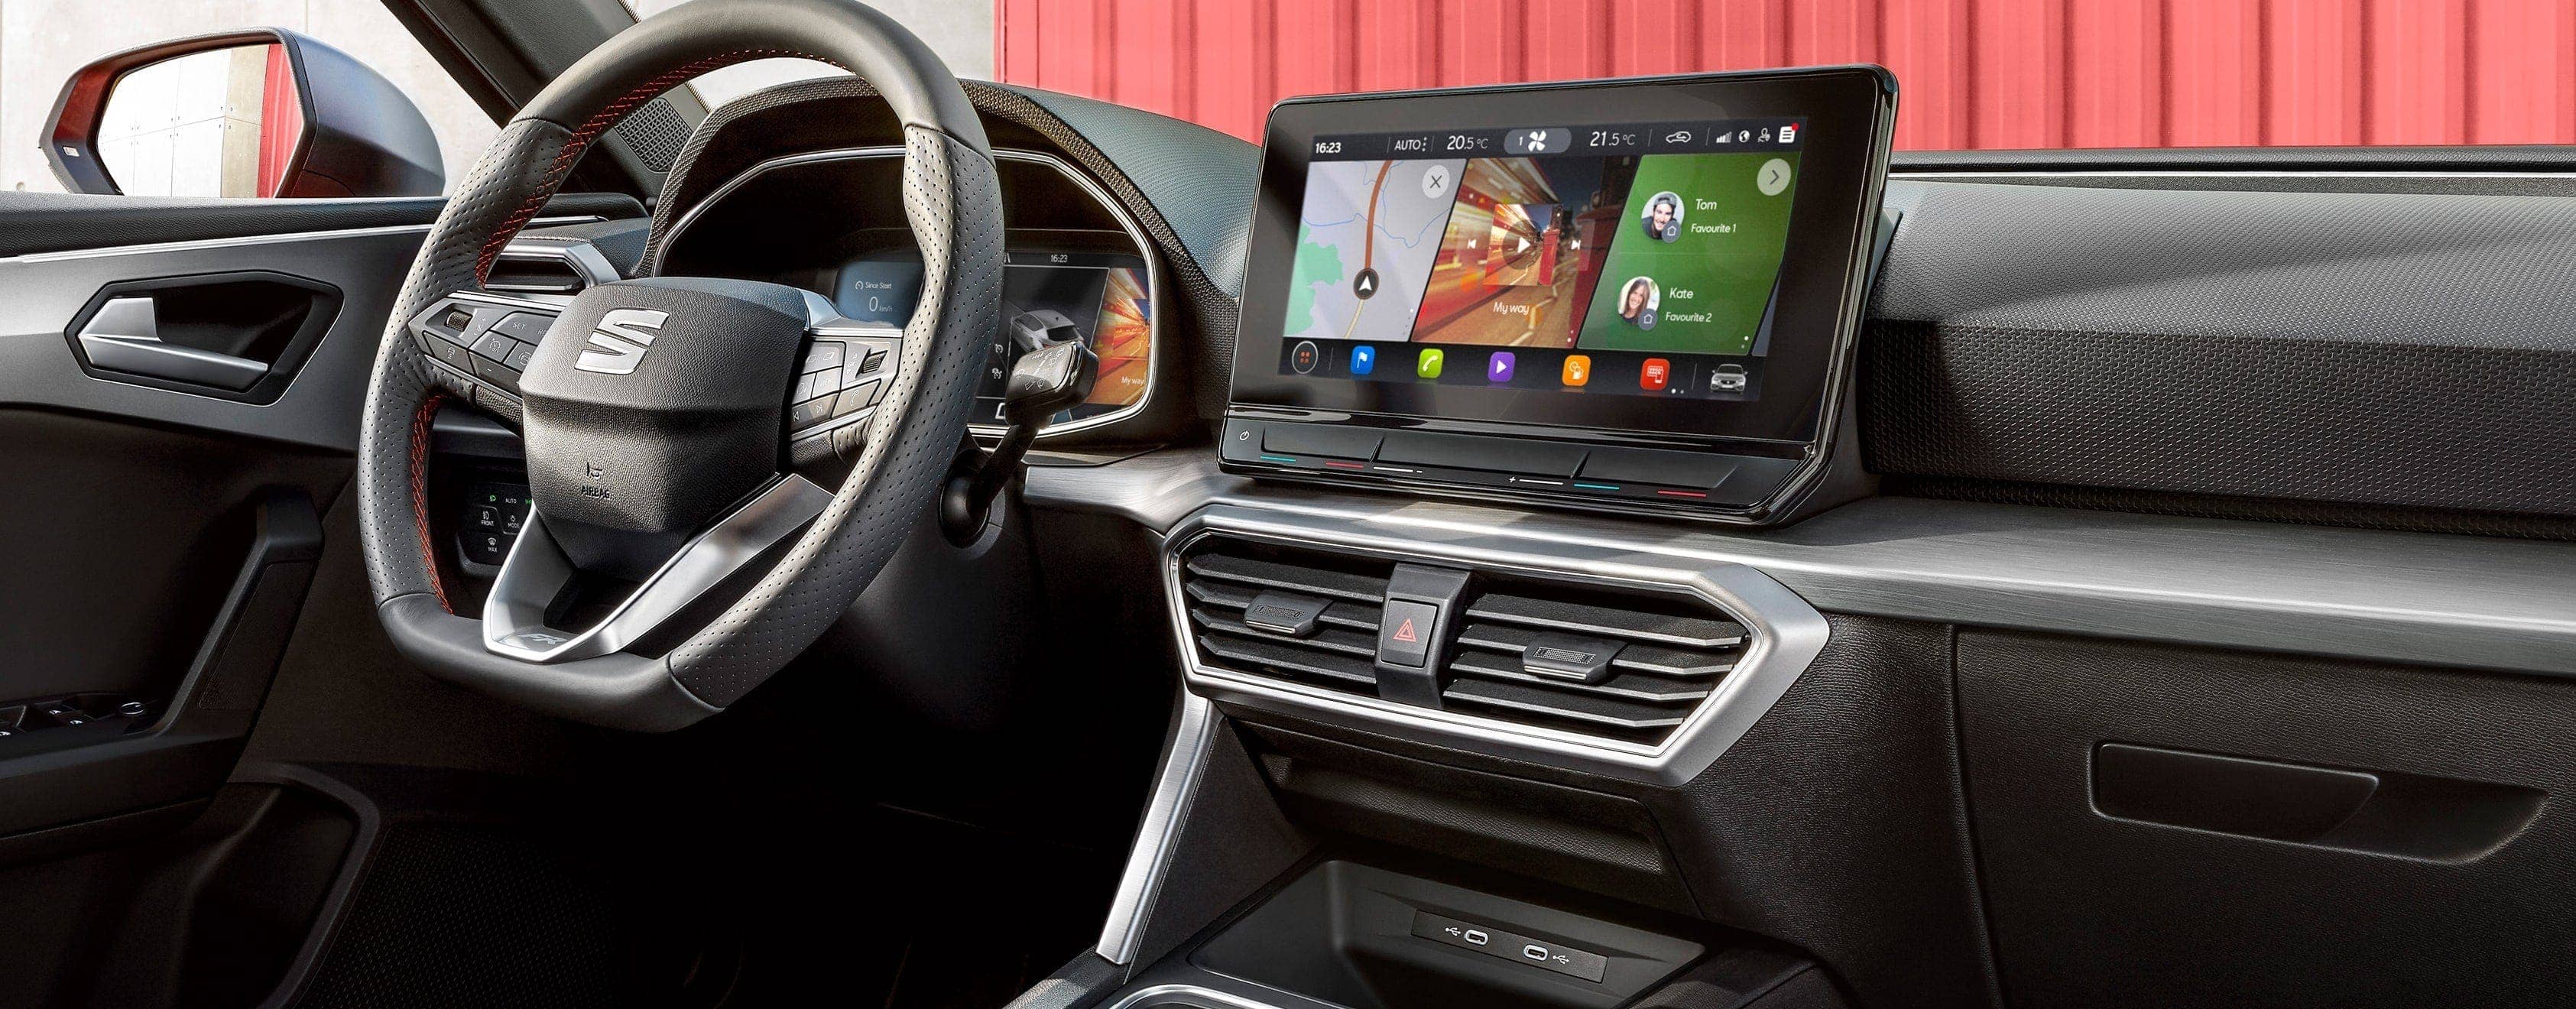 SEAT Leon sportstourer 2020 technology features 10 inch navi system with touchslider